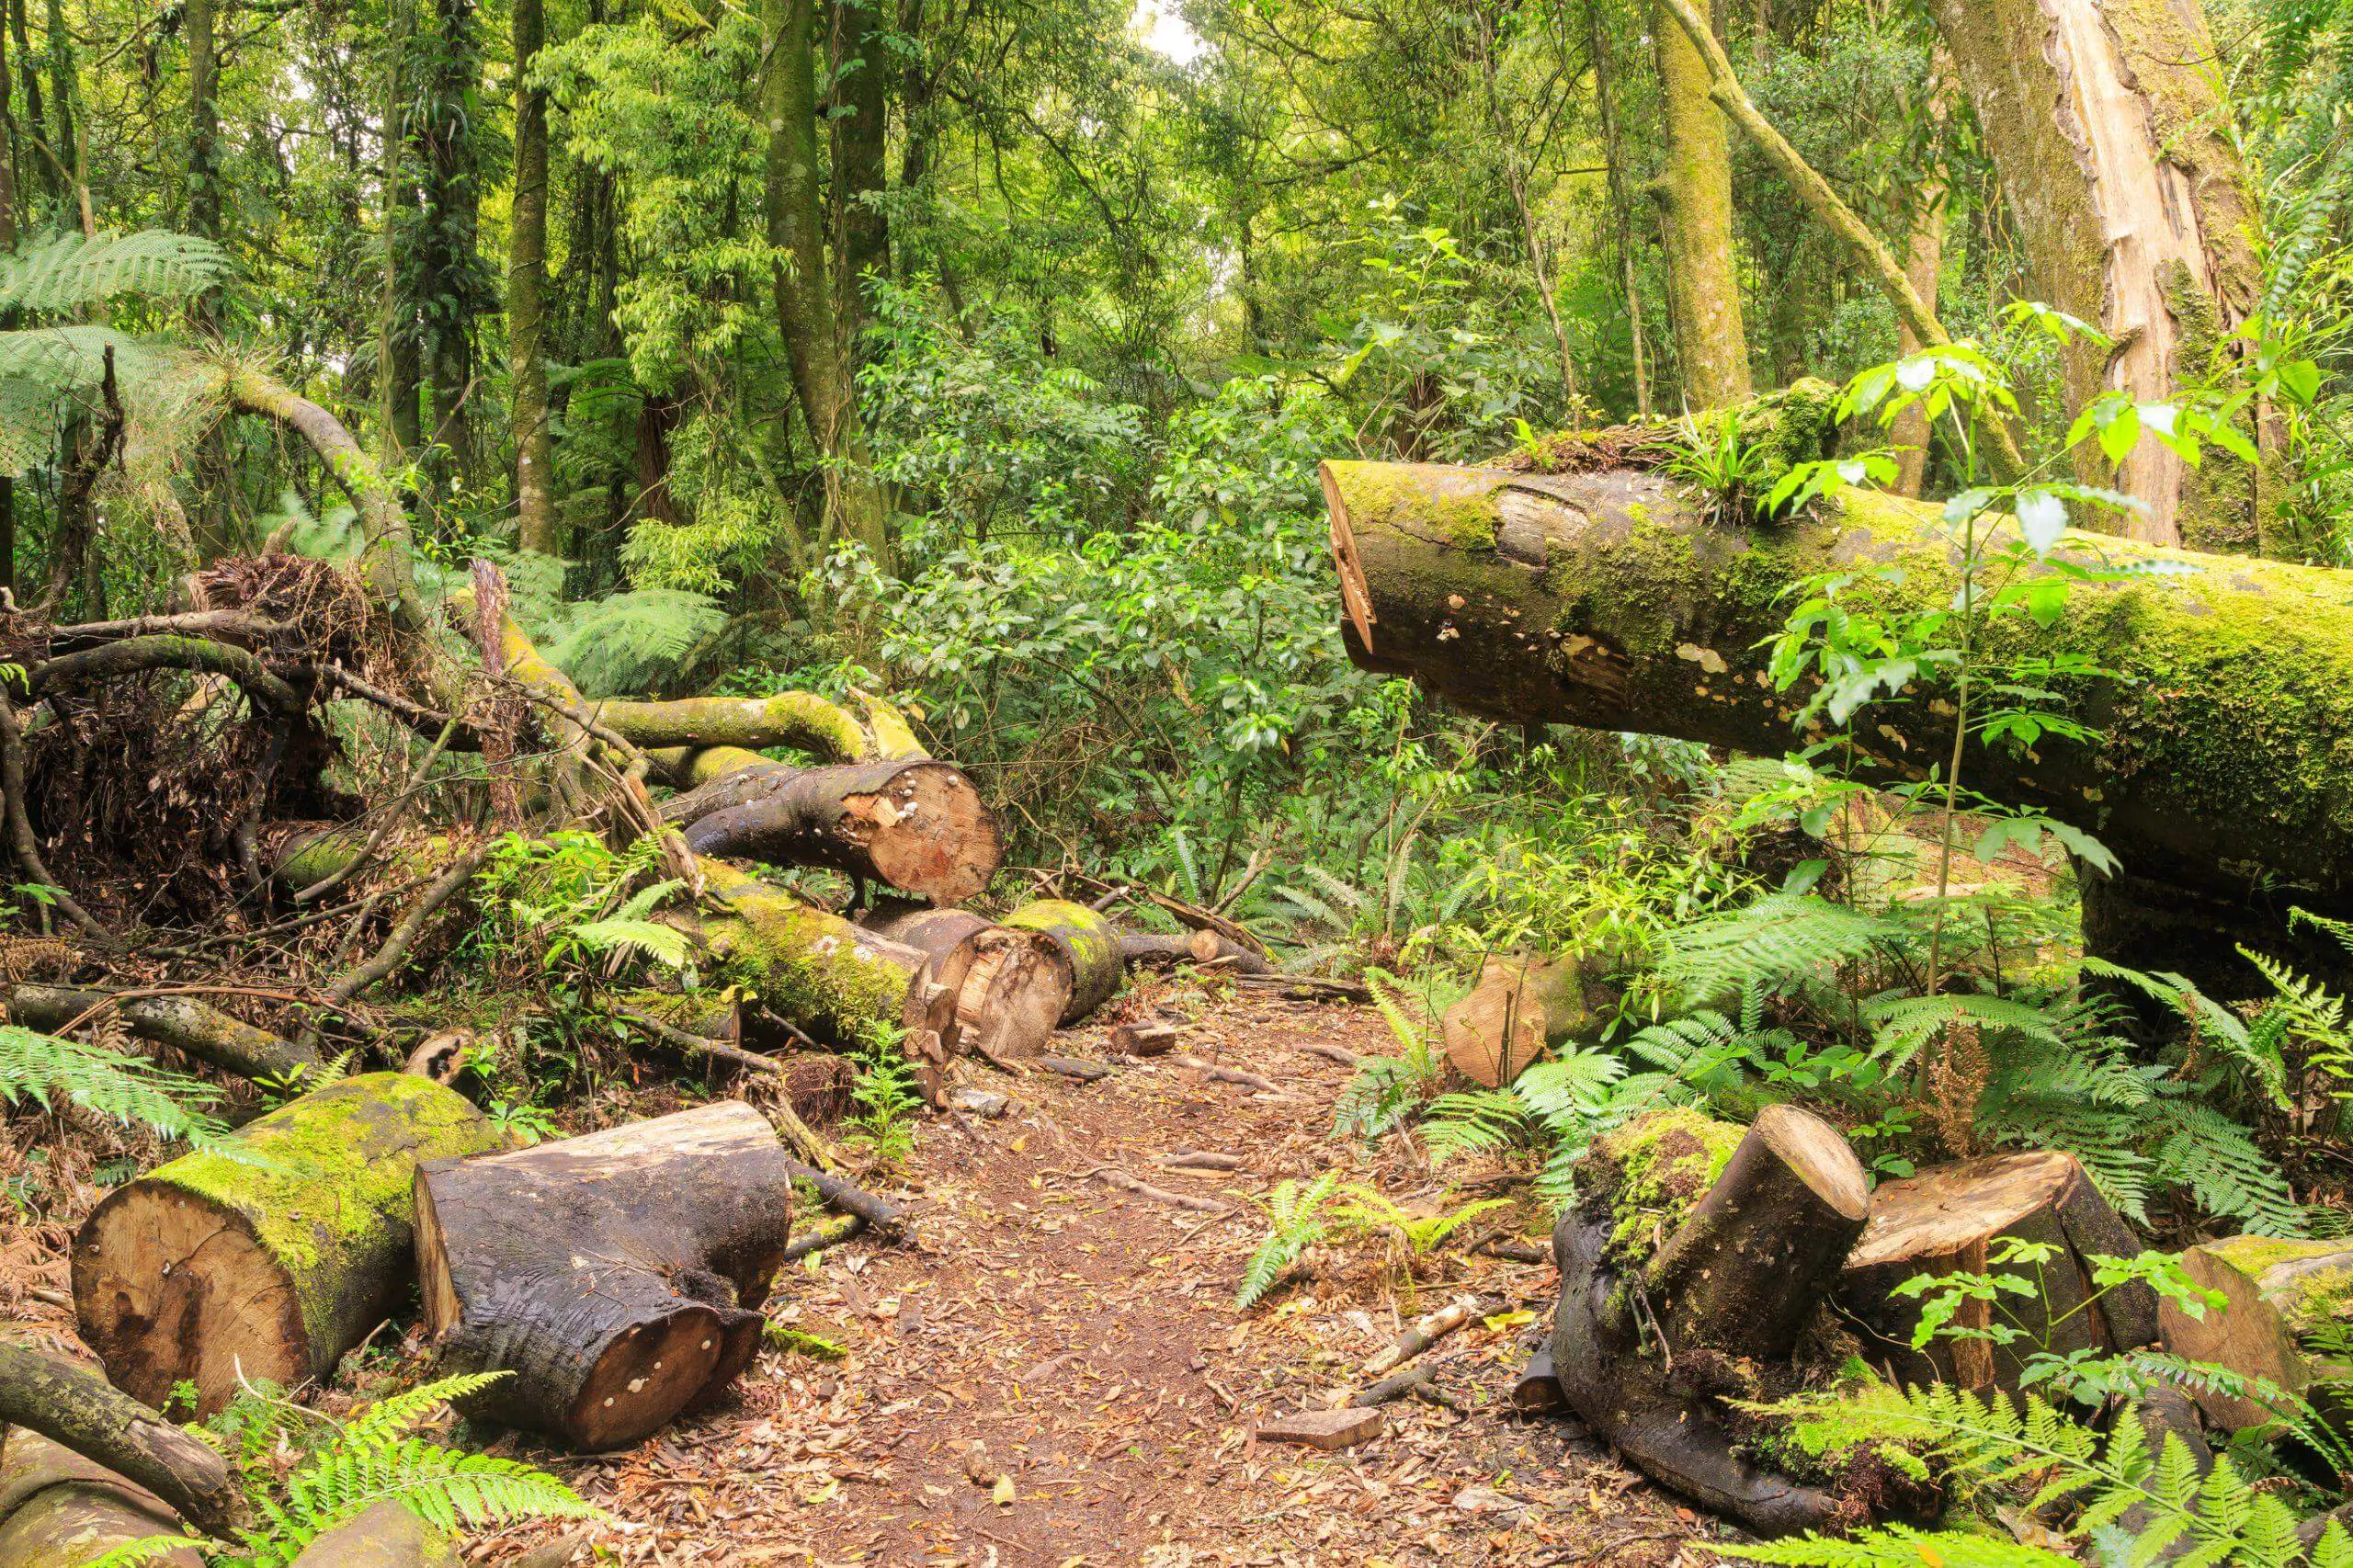 This fallen tree has been cut through by maintenance workers to keep the trail clear